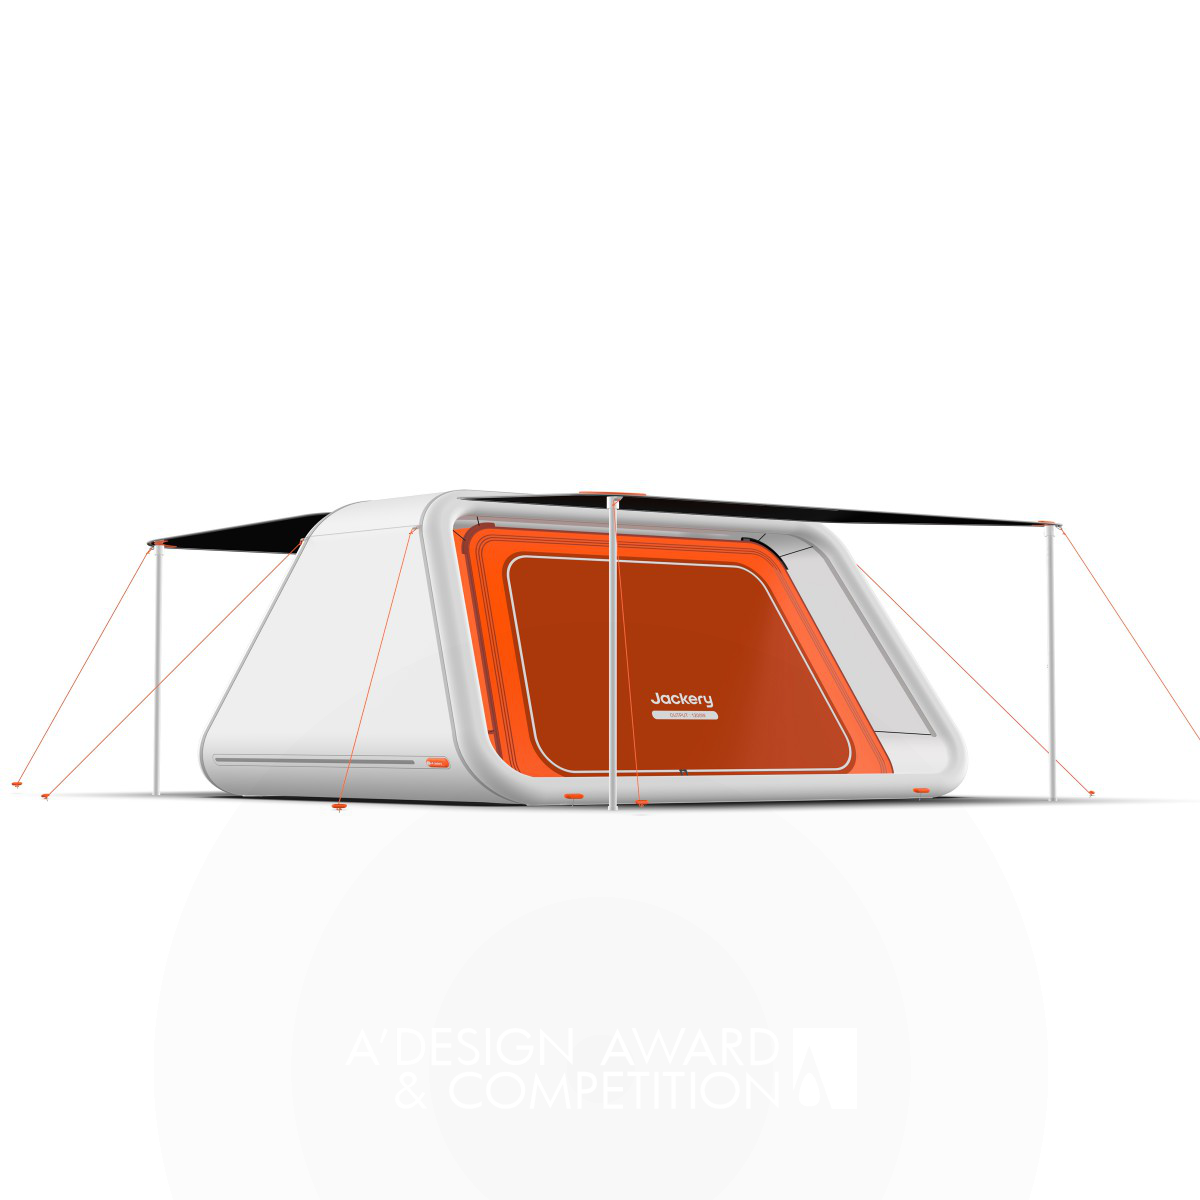 Light Tent Air: Redefining Outdoor Camping with Green Energy